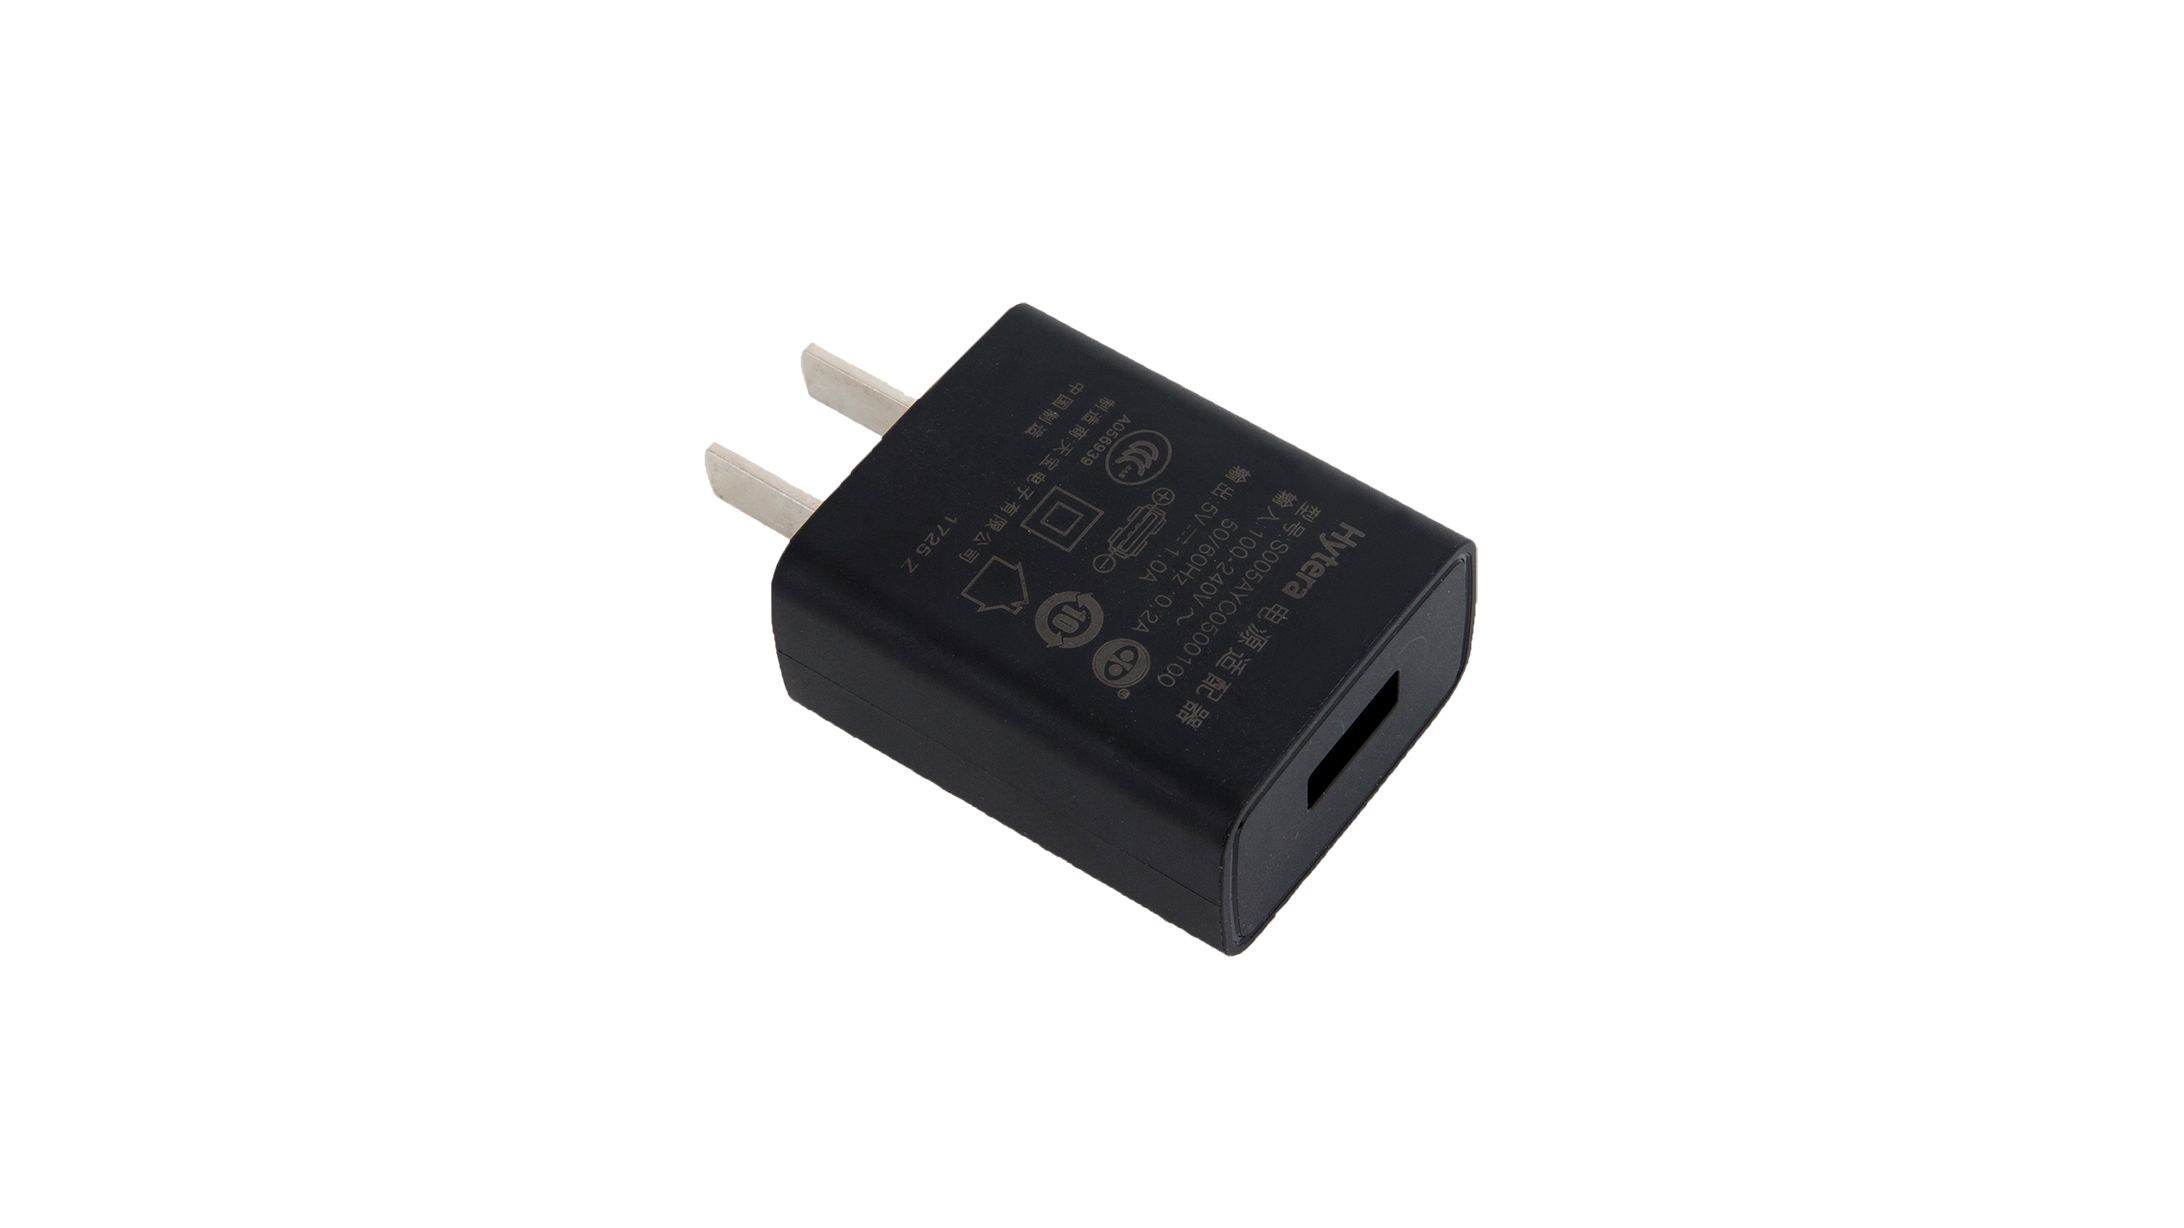 PS2022 Power Adapter (GB)